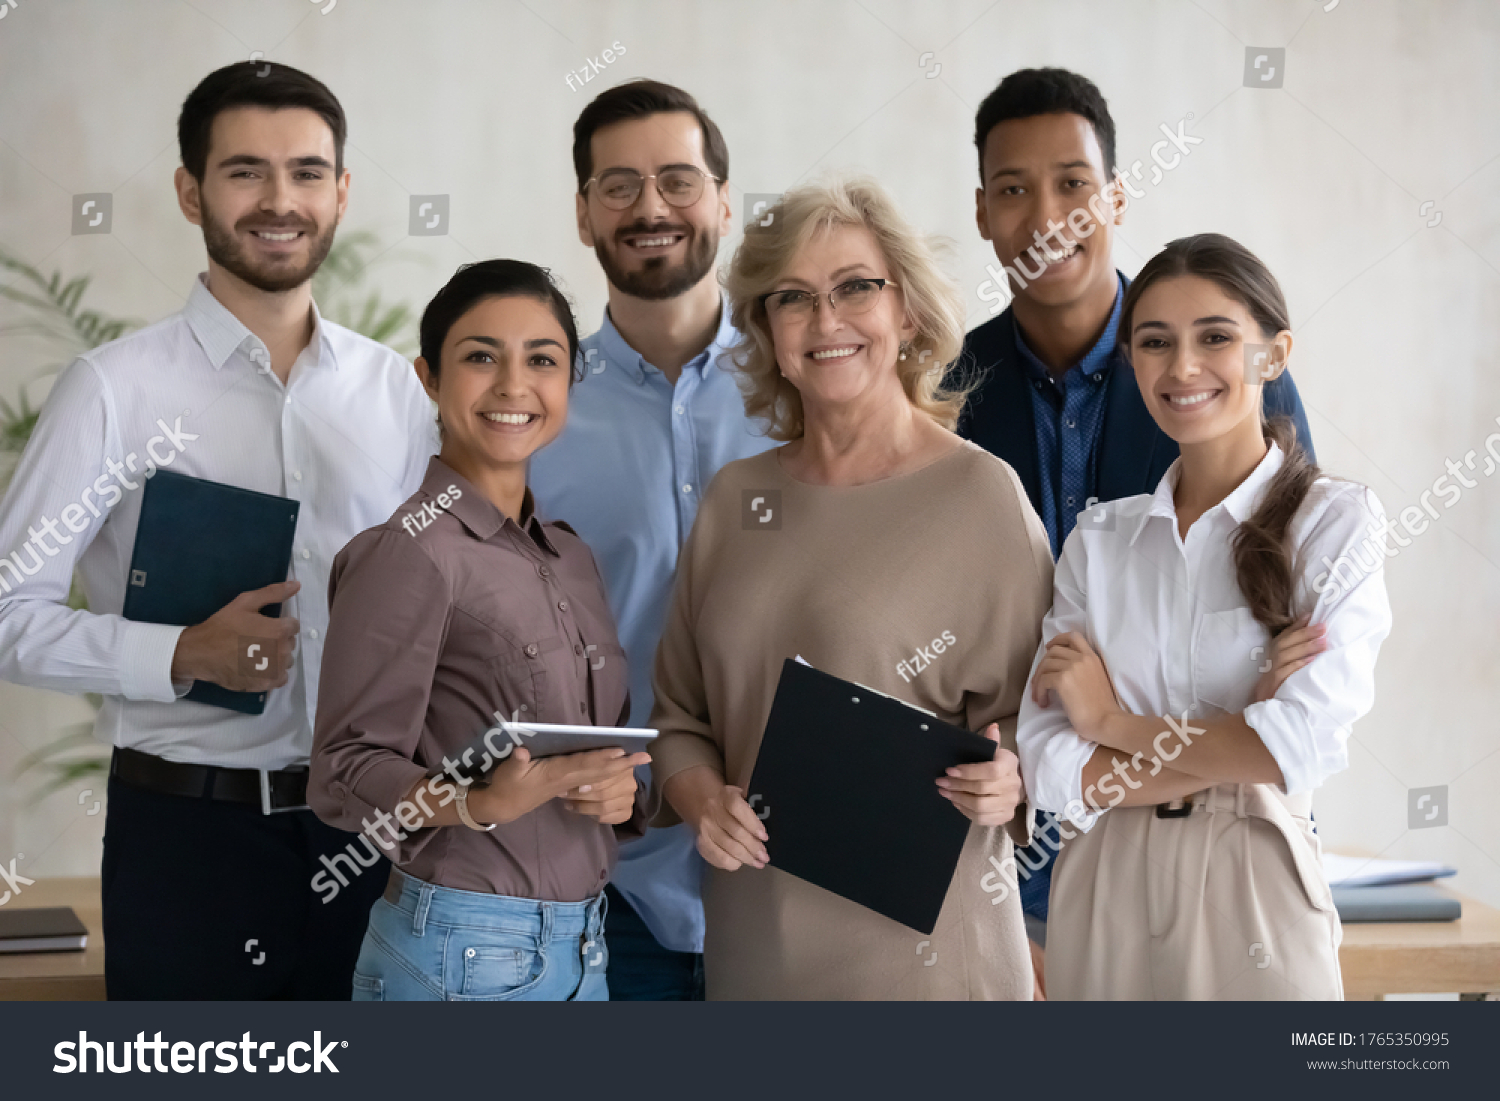 Corporate portrait smiling diverse employees team standing in office, looking at camera, successful happy workers with middle aged leader posing for photo, motivated staff, workforce #1765350995